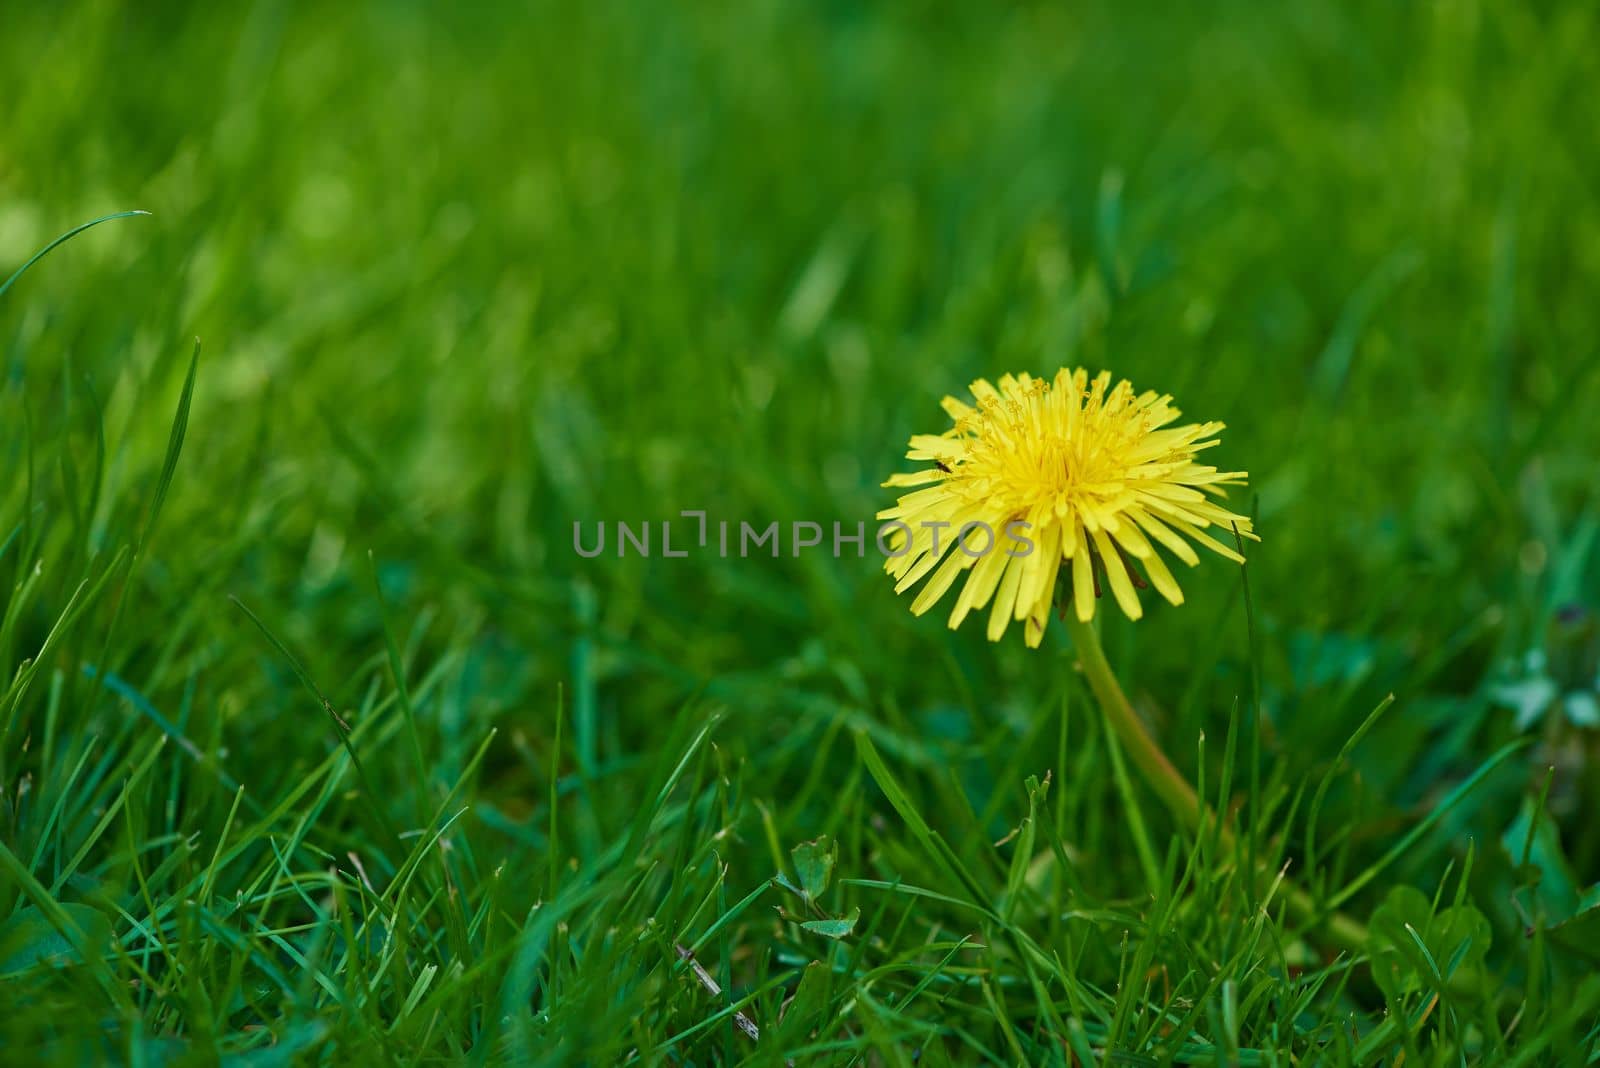 Weeds can be beautiful. A bright yellow Dandelion growing on a lawn. by YuriArcurs